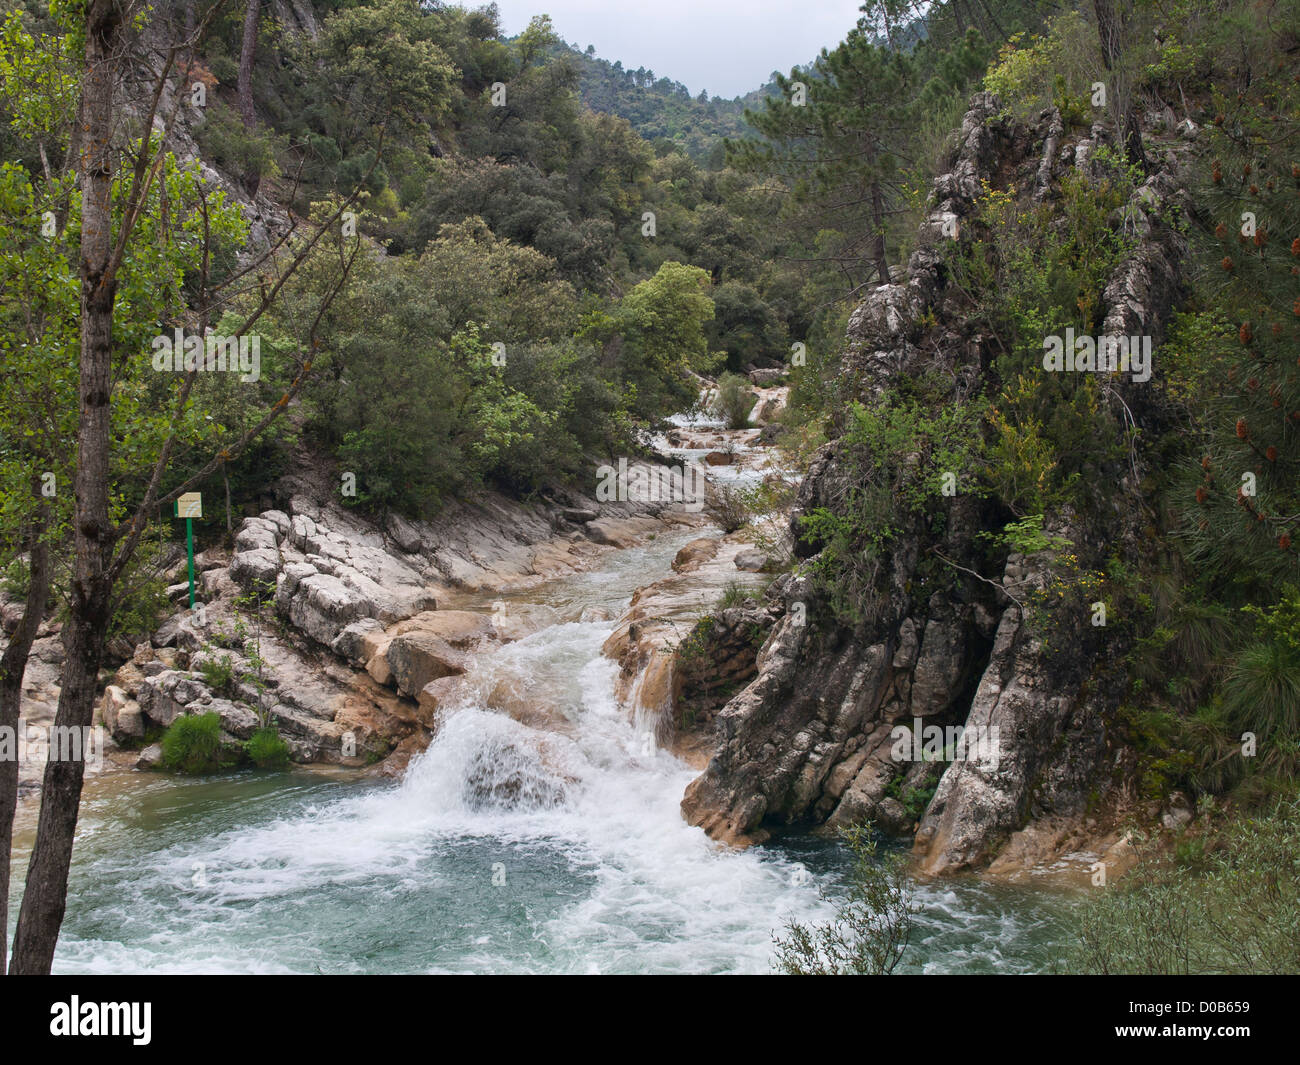 Hiking in Sierrra de Cazorla nature reserve in Andalusia Spain, view of waterfall over cliffs in the Rio Borosa river, signpost Stock Photo